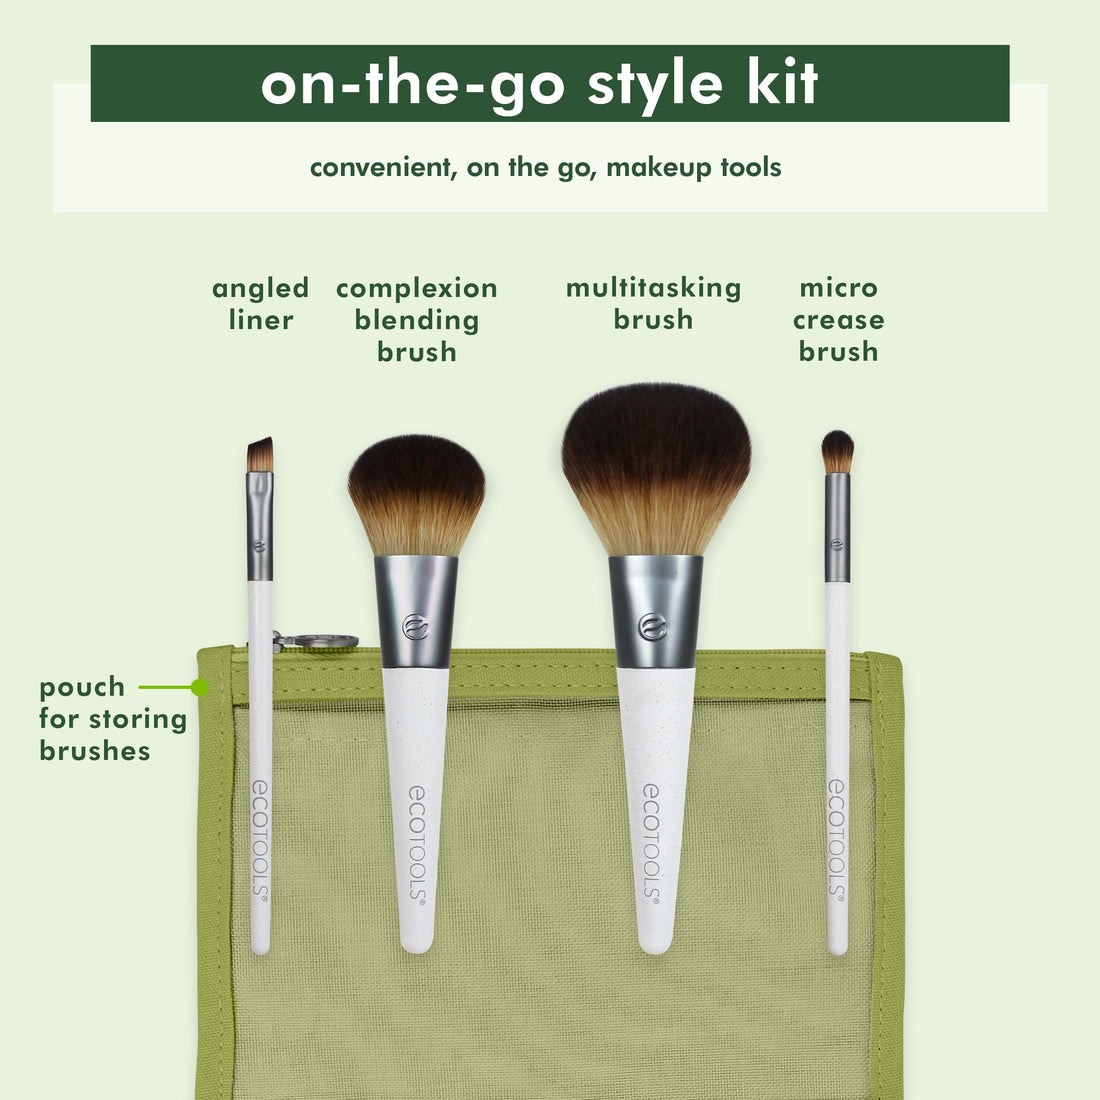 Magnetic Silicone Makeup Brush Holder: Travel-Friendly with Built